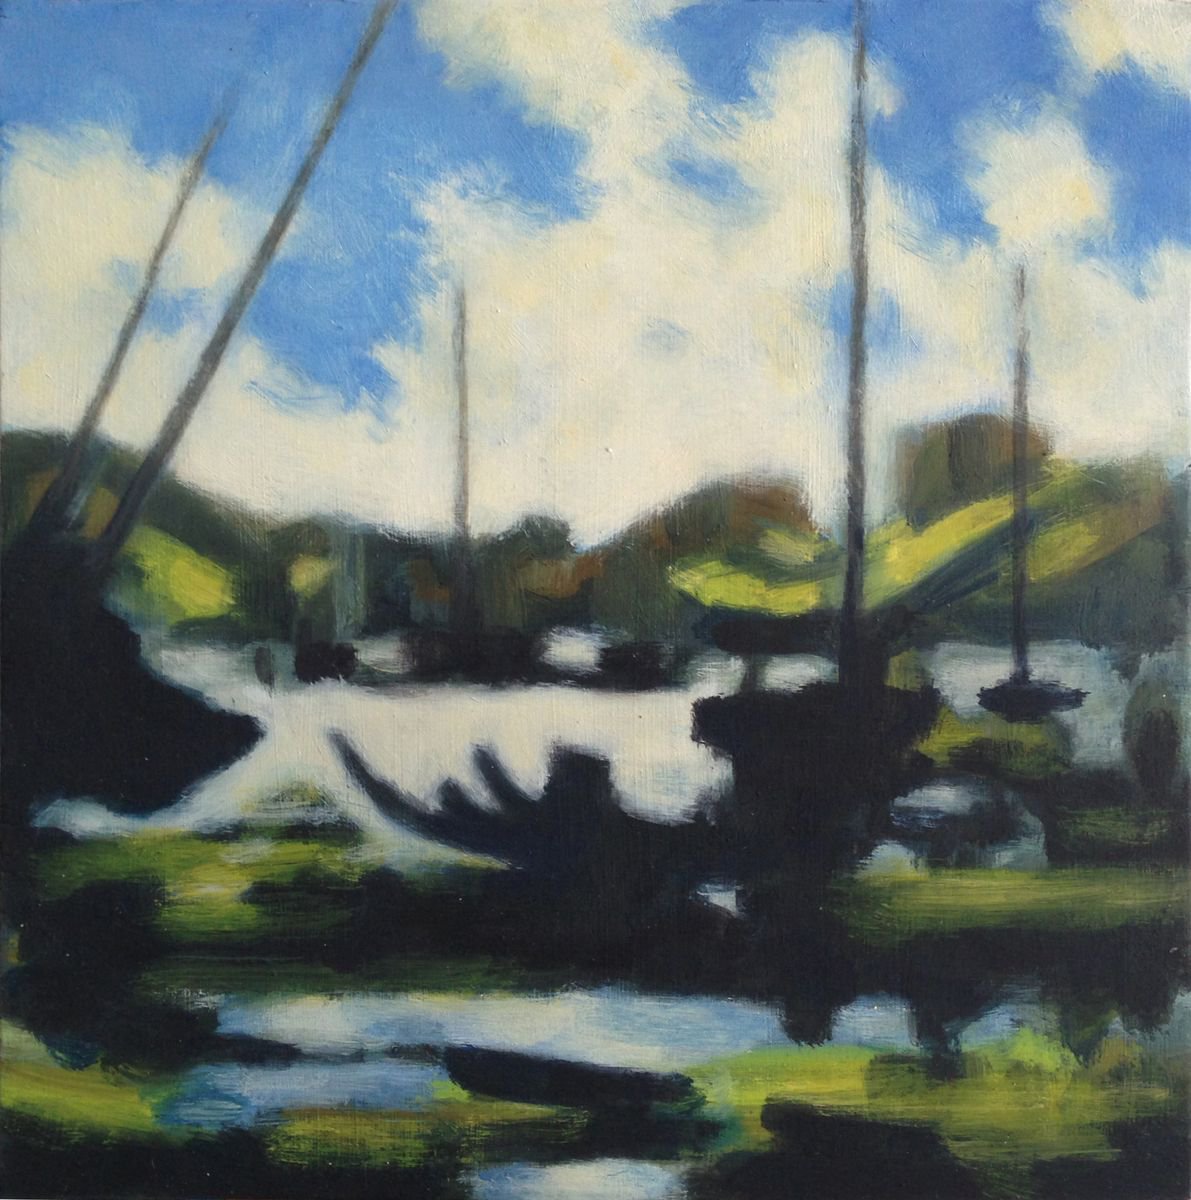 Boats on the estuary 1 by Hugo Lines